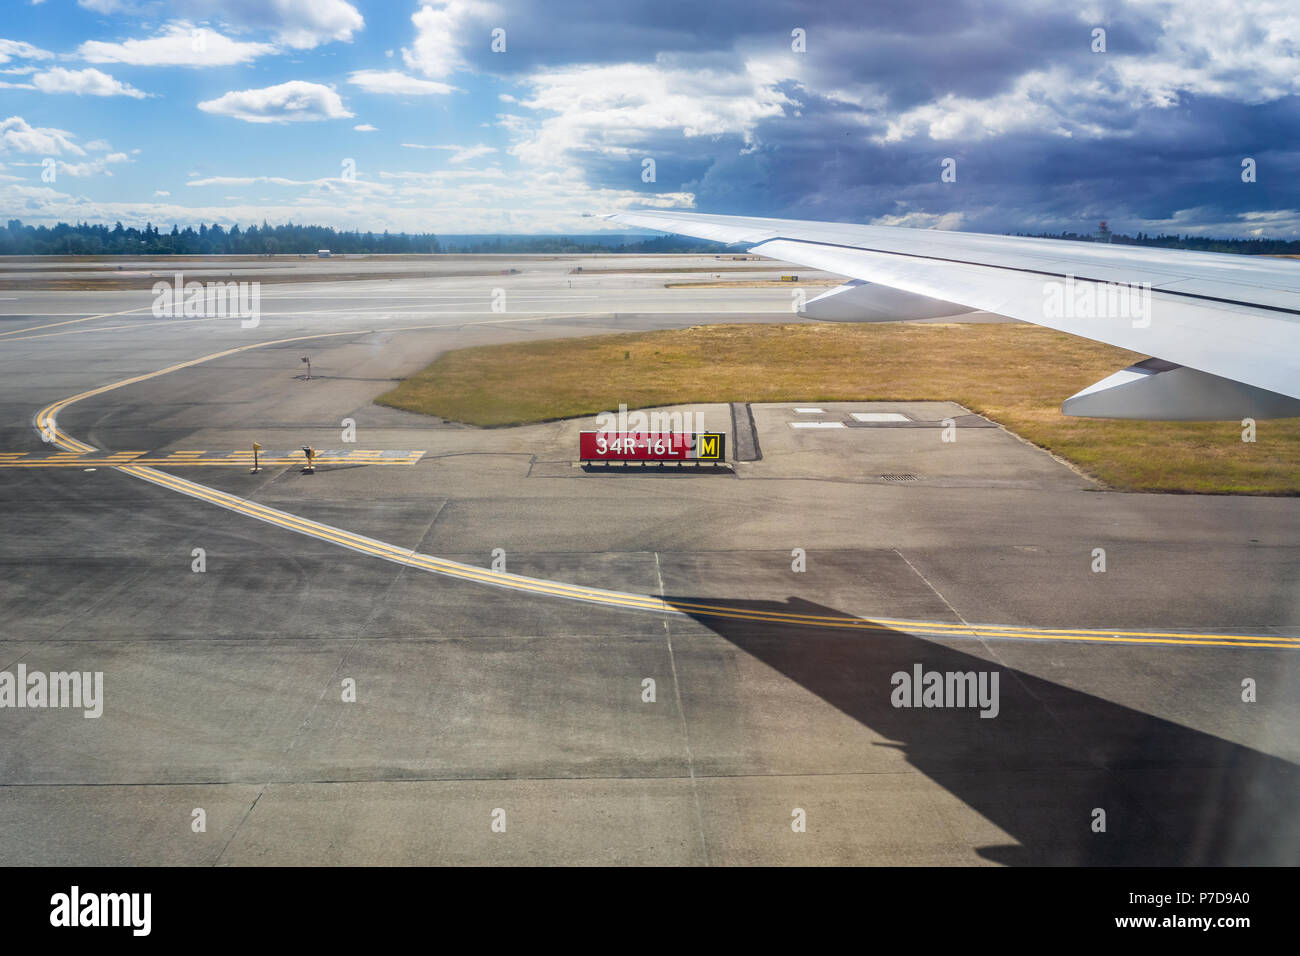 Airplane wing with its shadow projected on the tarmac during take off. Travel concept. Stock Photo